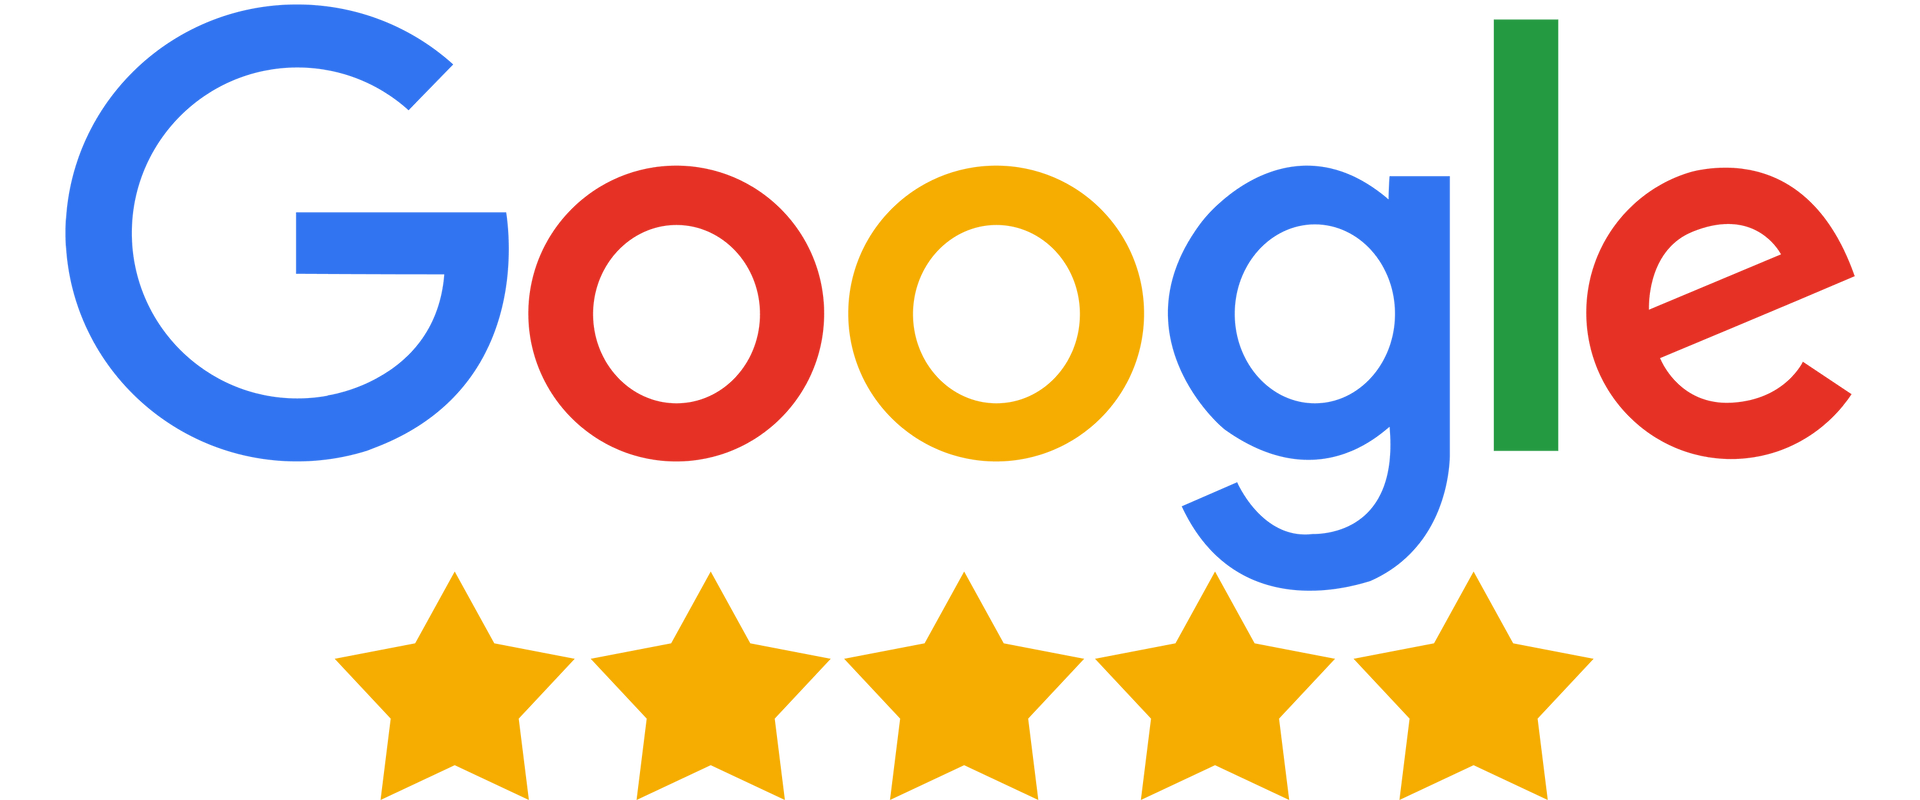 Image of Google logo with five-star review